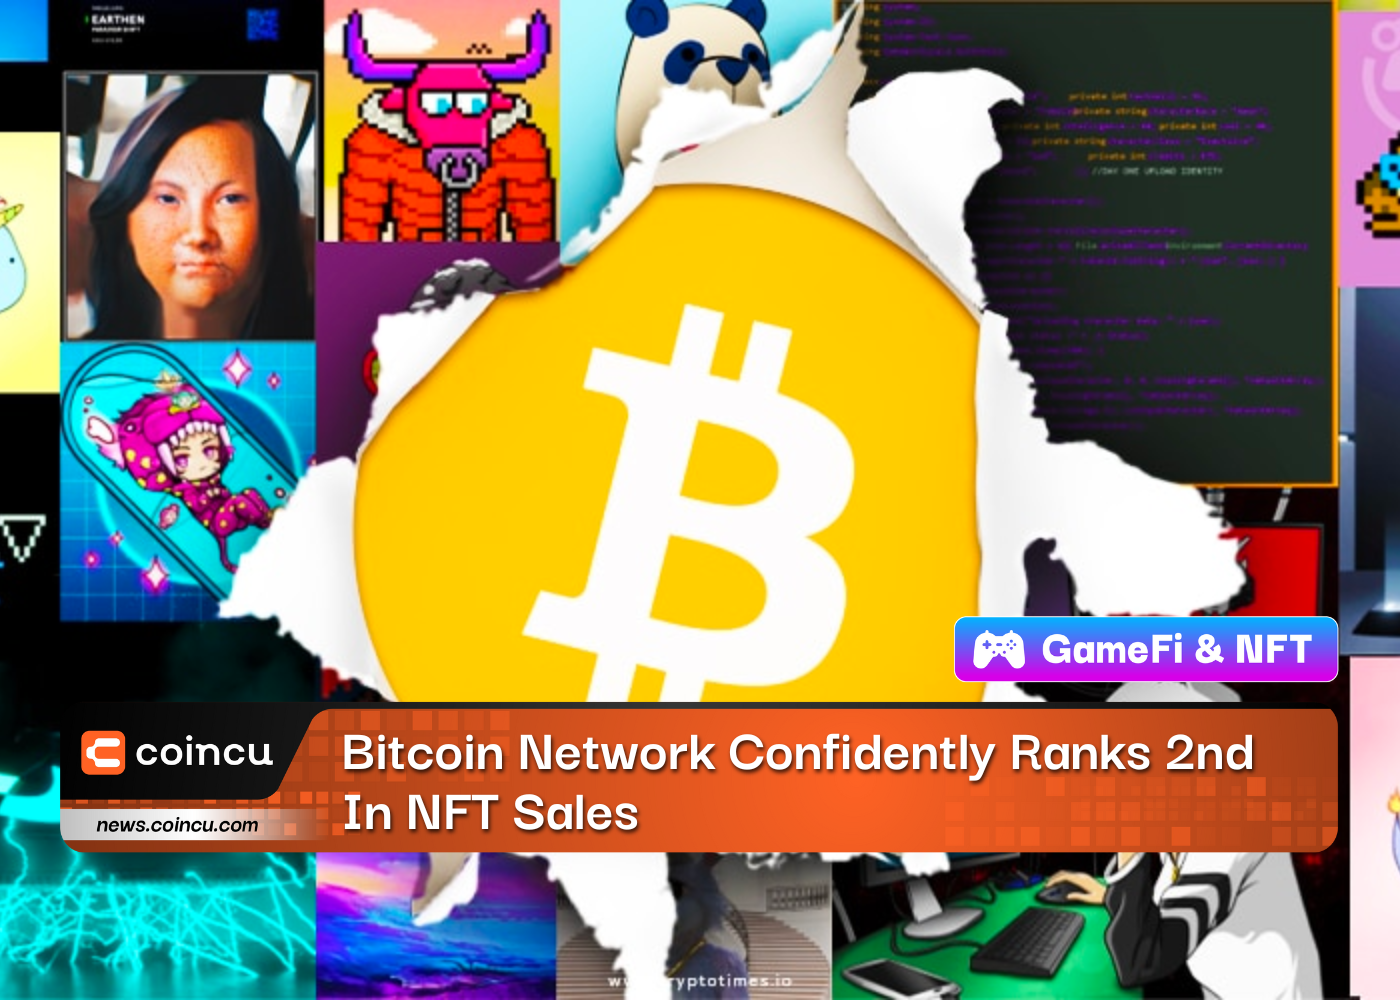 Bitcoin Network Confidently Ranks 2nd In NFT Sales